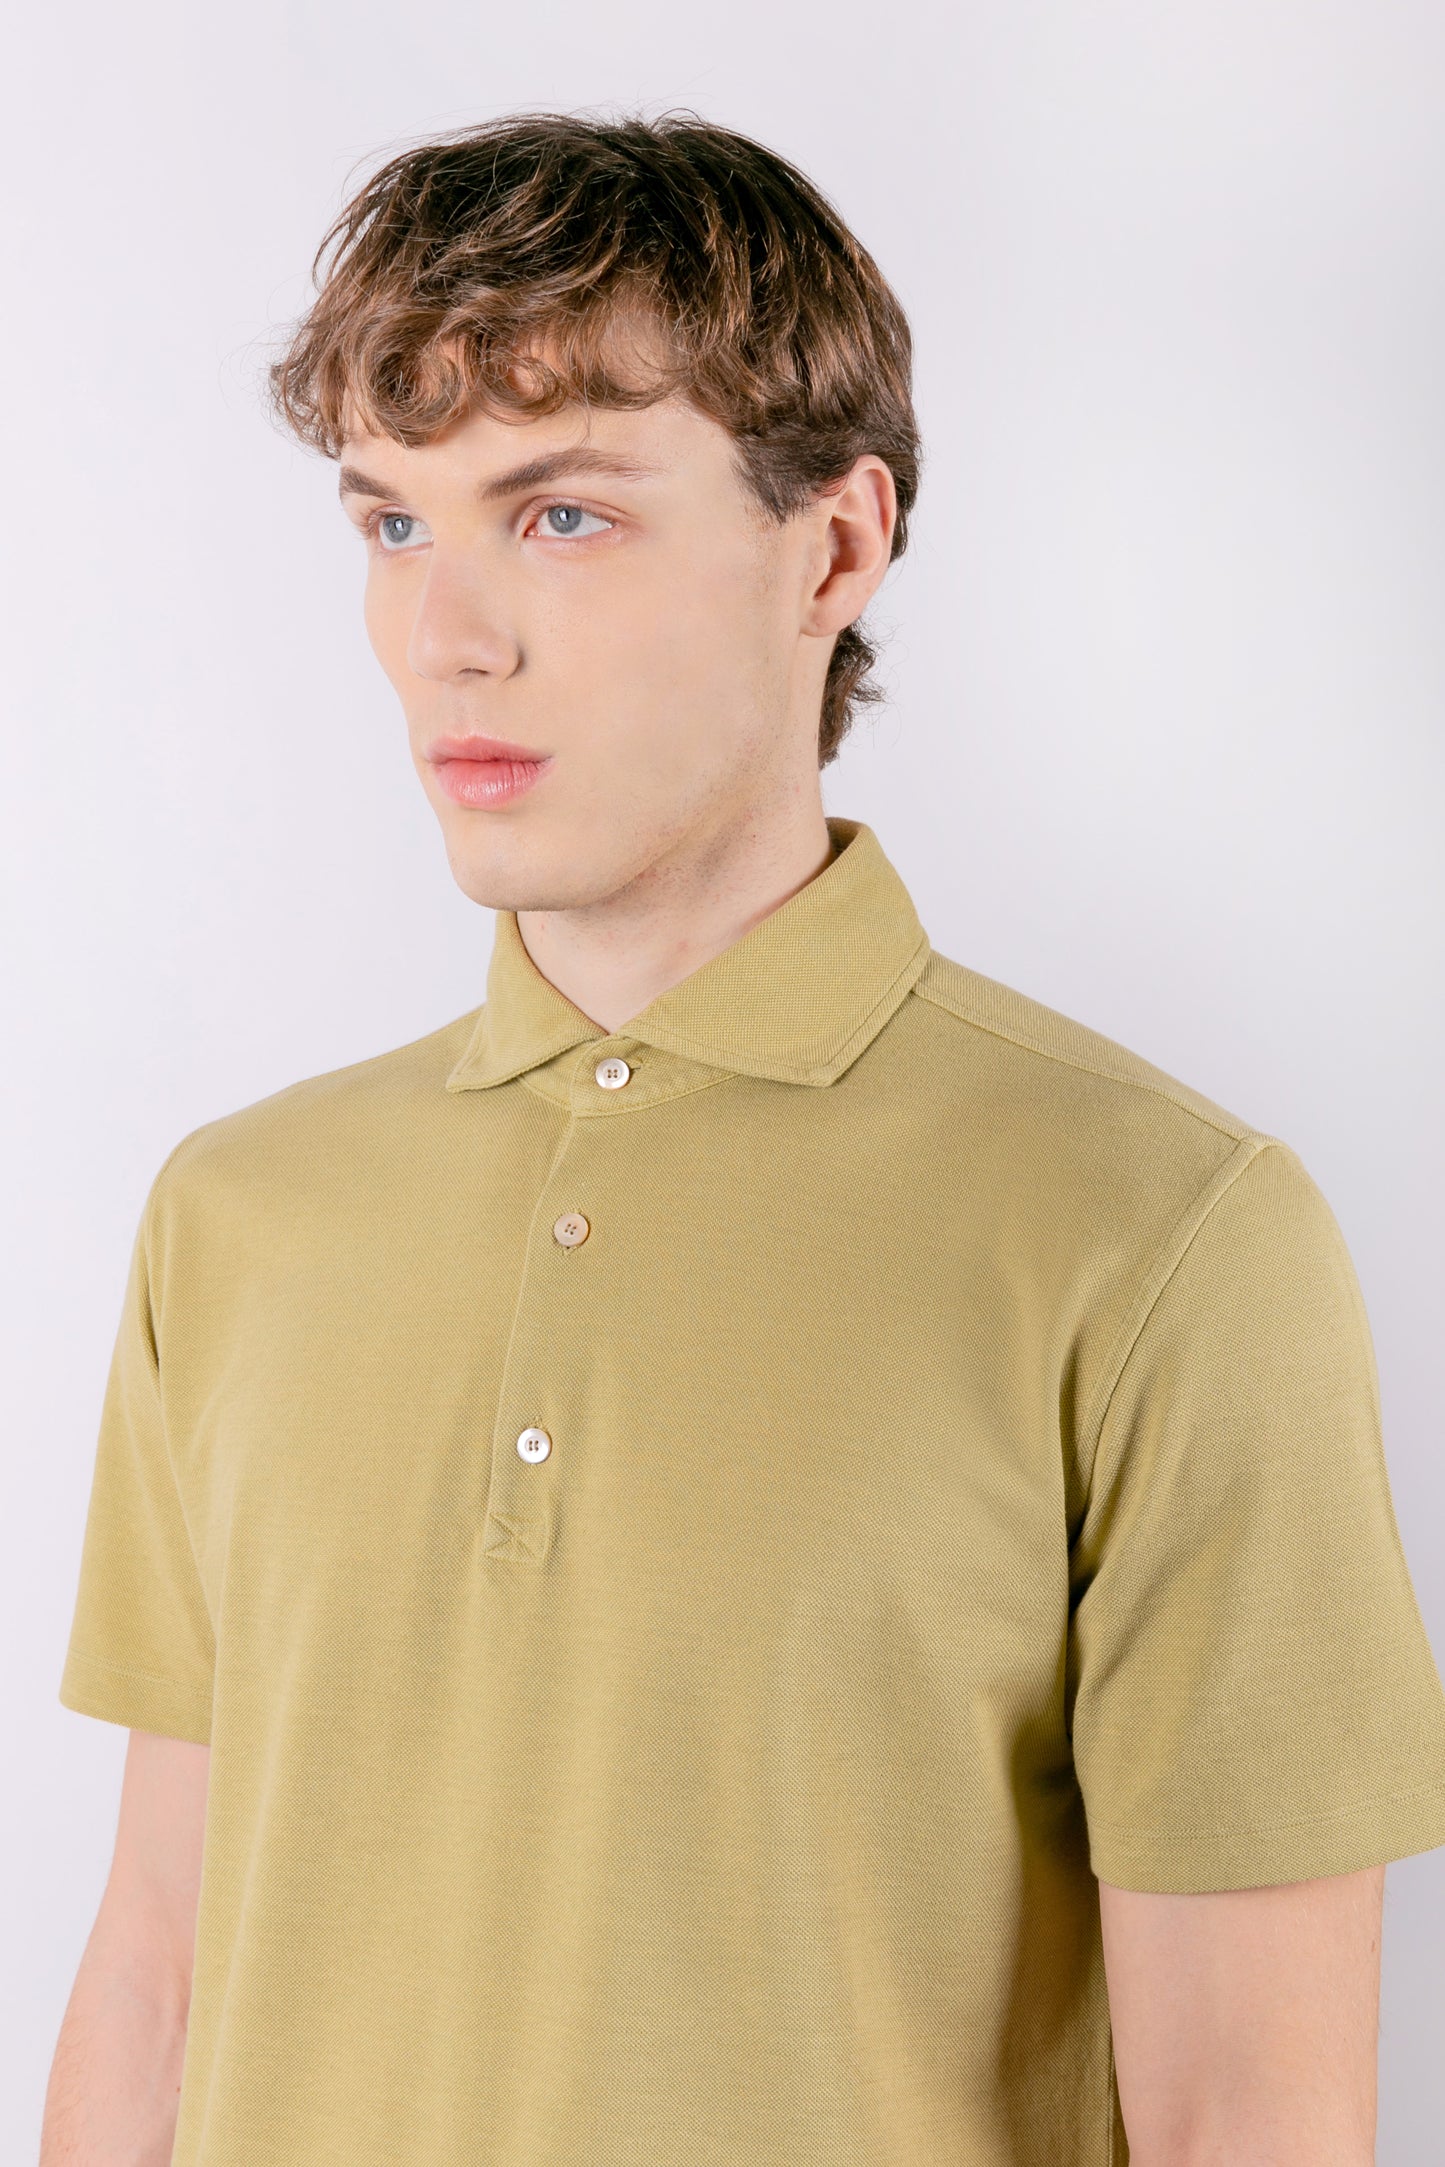 Short-sleeved green piqué polo shirt with 3 buttons